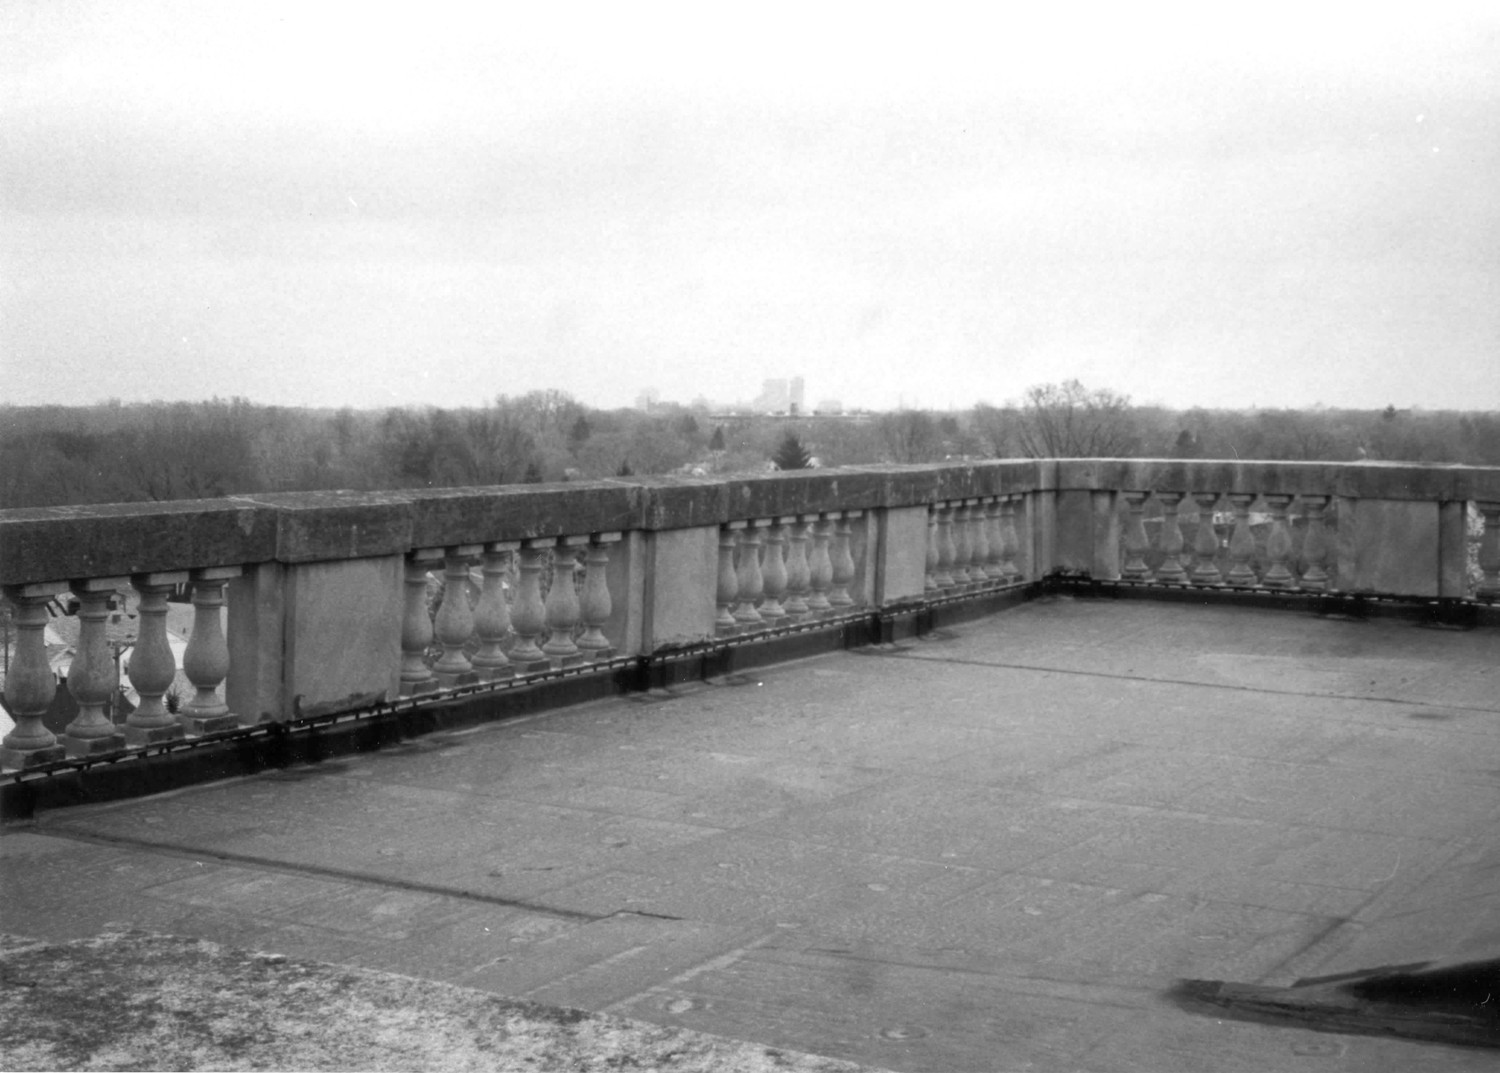 Lucas County Hospital and Nurse's Home, Toledo Ohio Hospital, fifth floor roof showing balustrade, looking northwest toward downtown Toledo (in distance) (1997)